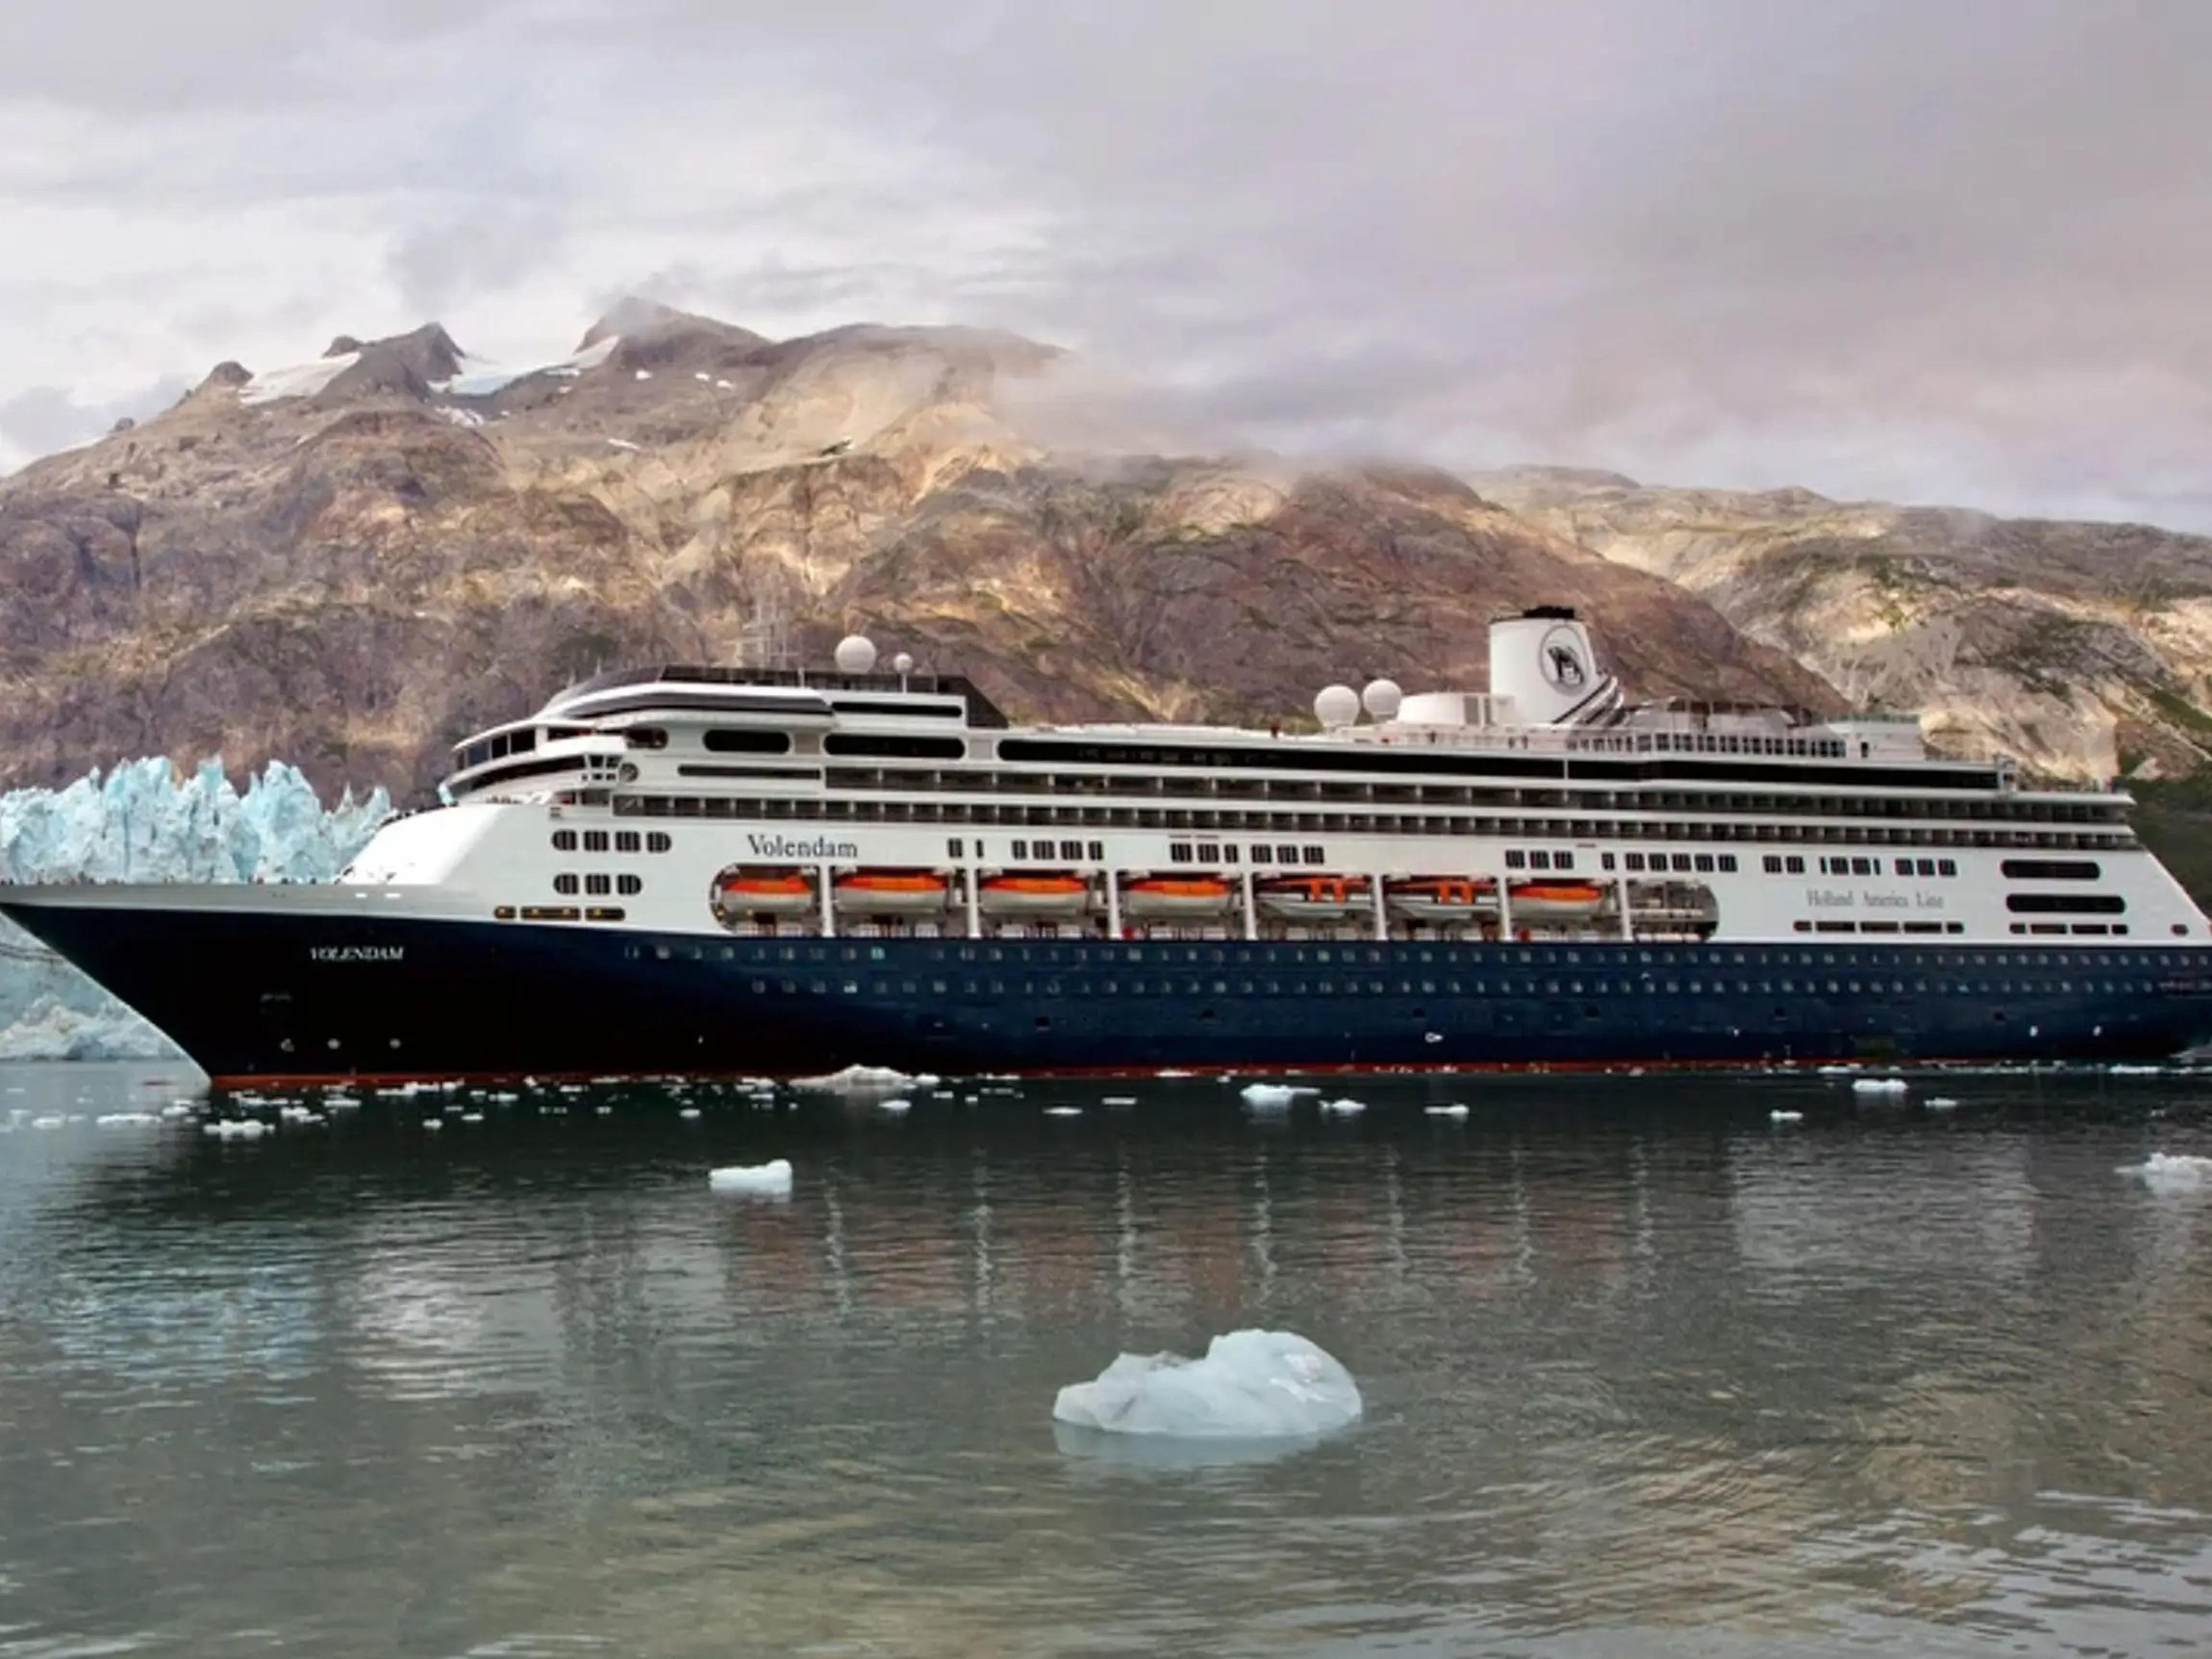 The Holland America Volendam sailing on water near icebergs and land